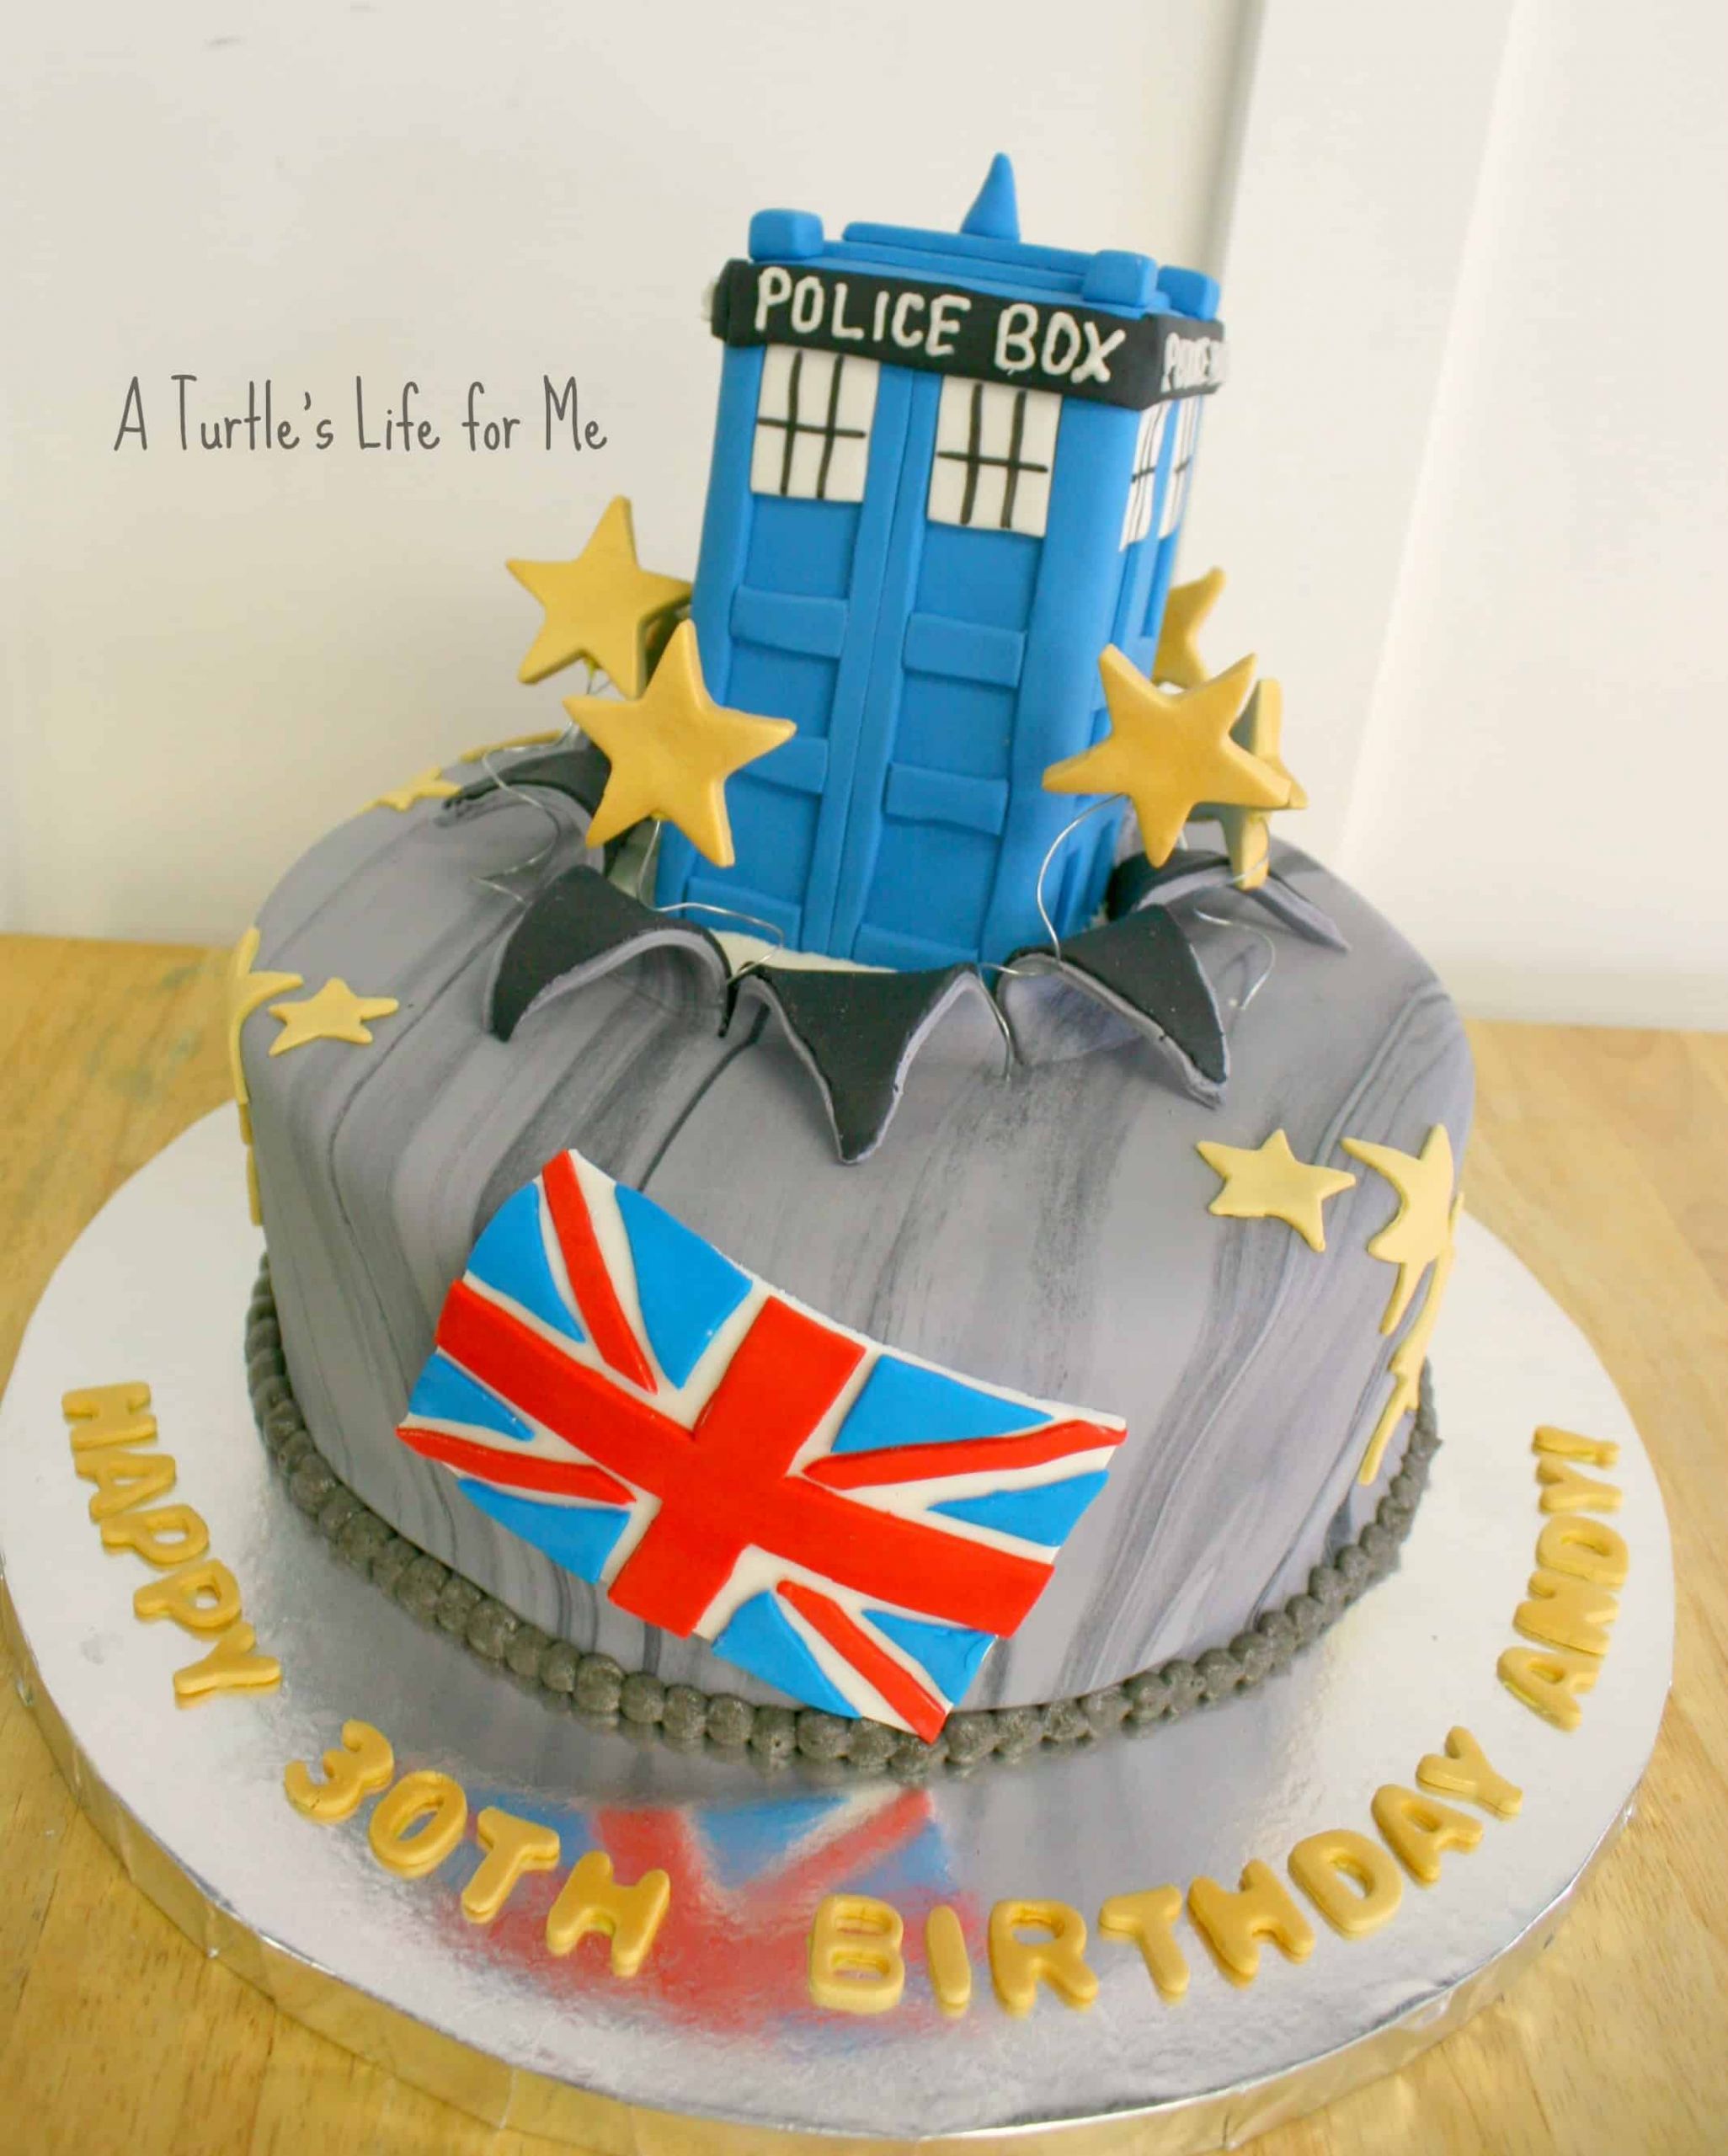 Dr Who Birthday Cake
 Rice Krispie Cake Topper Tutorial A Turtle s Life for Me